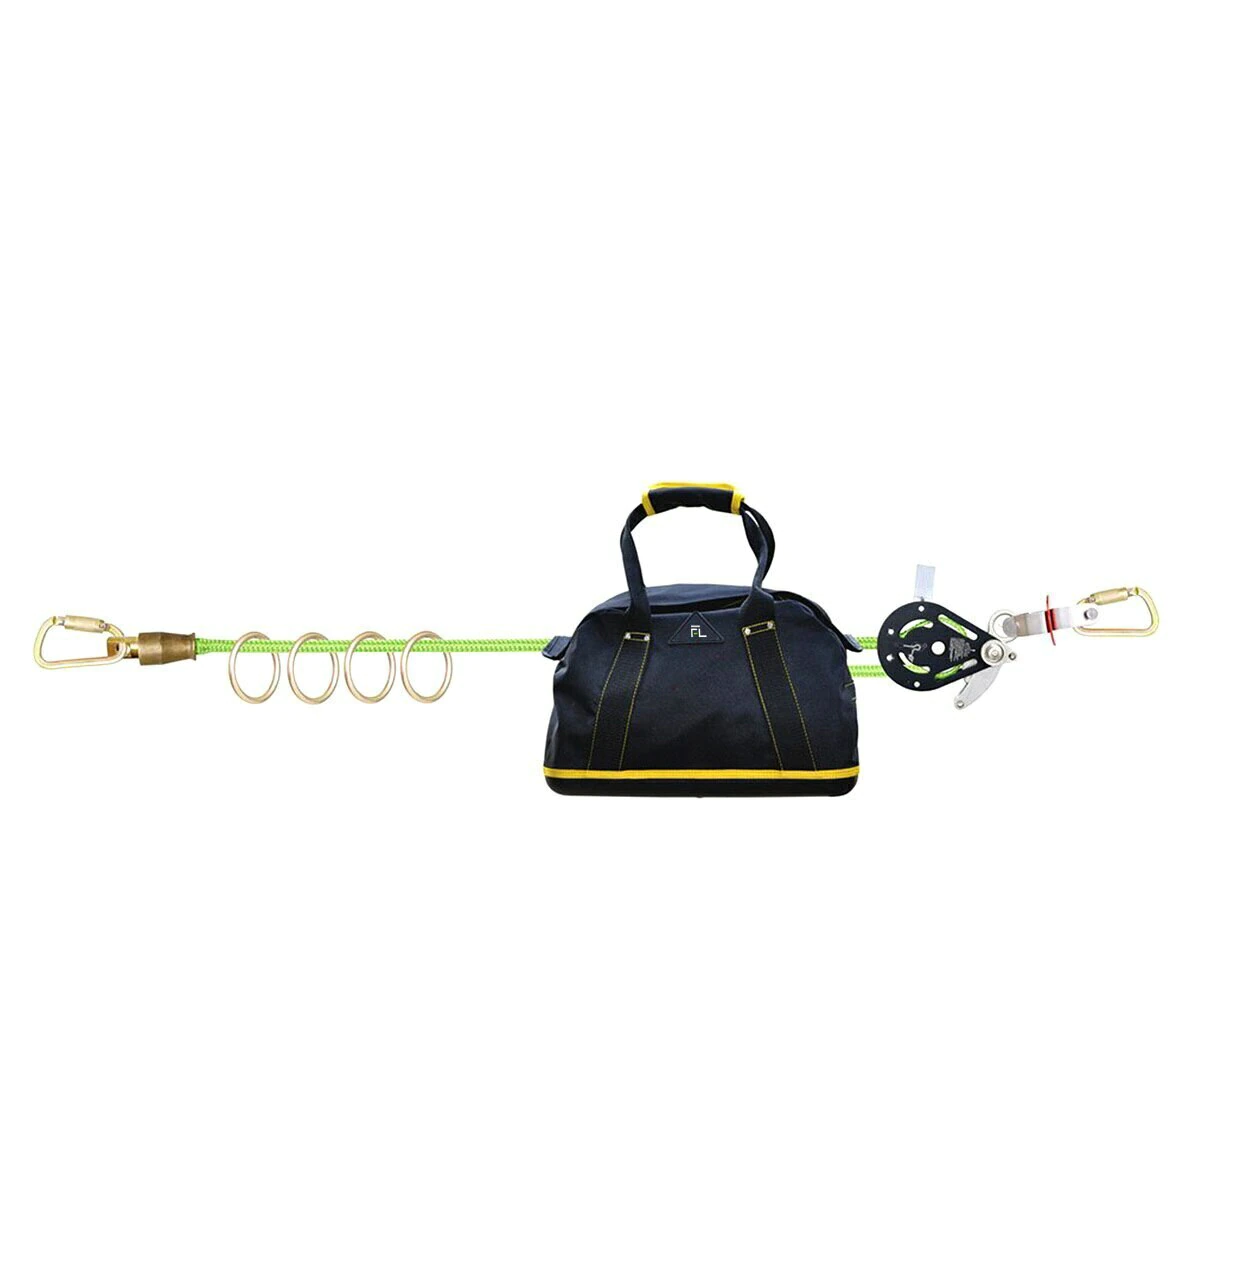 HLK1004 4-person 100' Adjustable Horizontal Lifeline System with 6' Anchor Straps